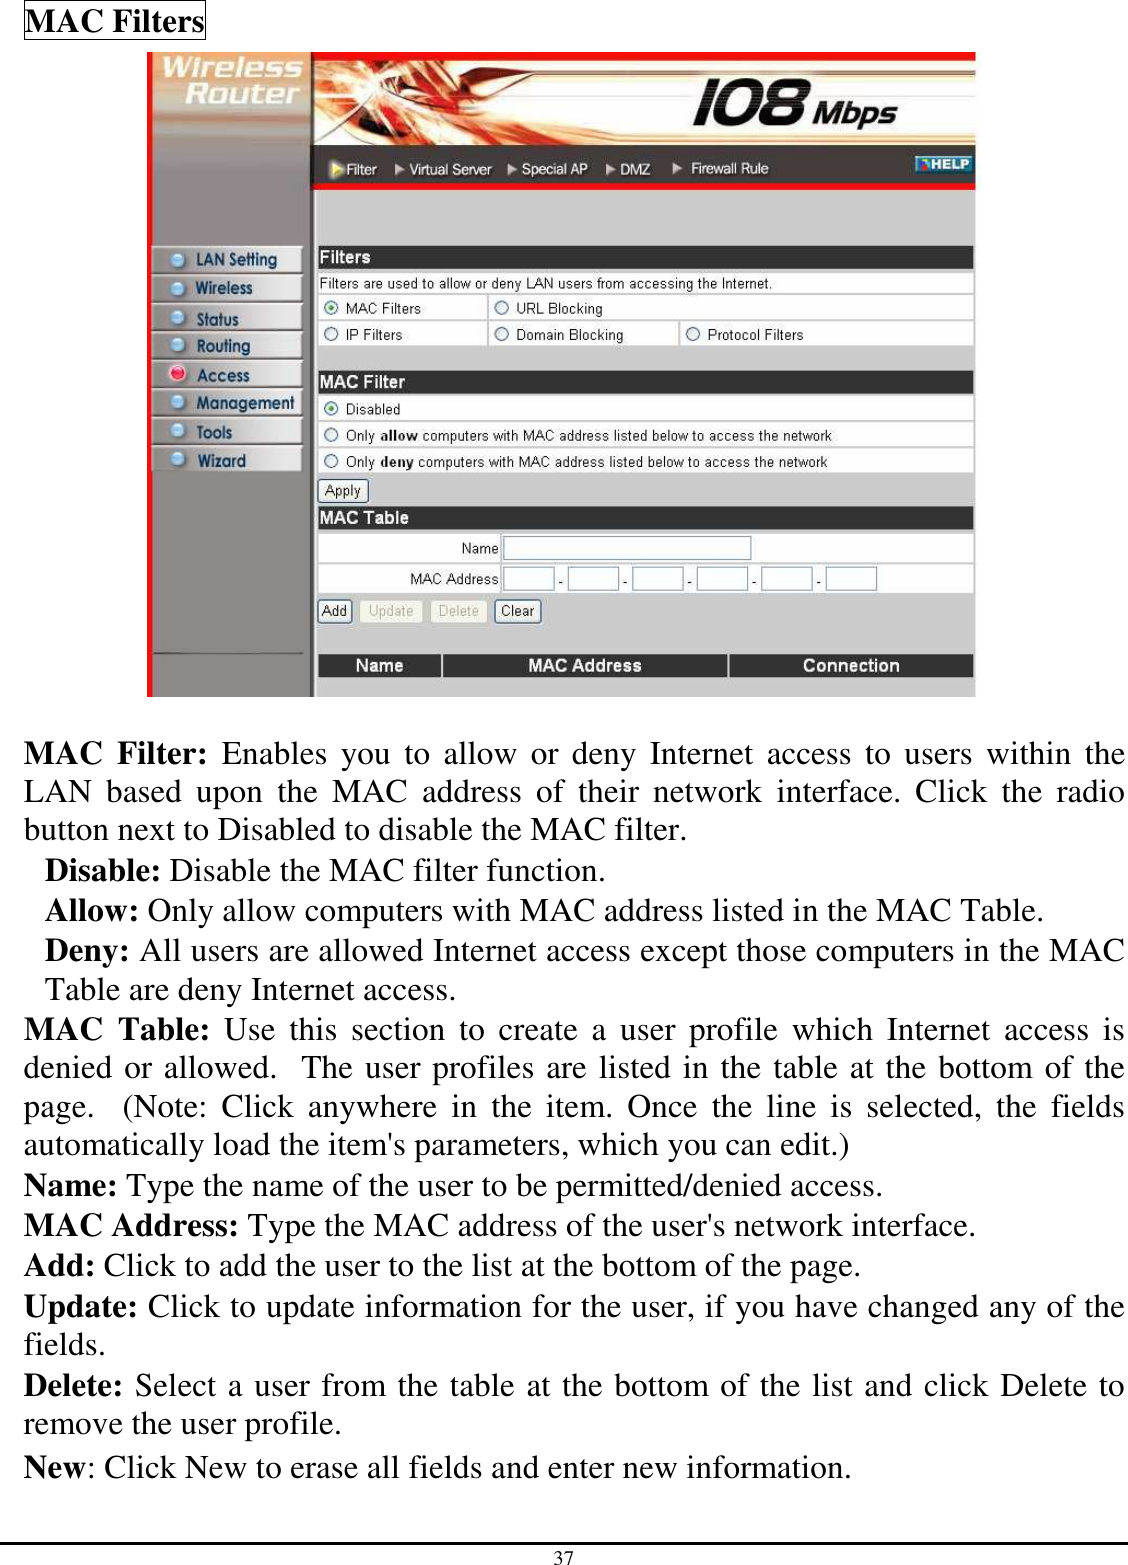 37 MAC Filters   MAC  Filter:  Enables  you  to allow  or deny Internet  access  to users  within  the LAN  based  upon  the  MAC  address  of  their  network  interface.  Click  the  radio button next to Disabled to disable the MAC filter. Disable: Disable the MAC filter function. Allow: Only allow computers with MAC address listed in the MAC Table. Deny: All users are allowed Internet access except those computers in the MAC Table are deny Internet access. MAC  Table:  Use  this  section  to  create  a  user  profile  which  Internet  access  is denied or allowed.  The user profiles are listed in the table at the bottom of the page.    (Note:  Click  anywhere  in  the  item.  Once  the  line  is  selected,  the  fields automatically load the item&apos;s parameters, which you can edit.) Name: Type the name of the user to be permitted/denied access. MAC Address: Type the MAC address of the user&apos;s network interface. Add: Click to add the user to the list at the bottom of the page. Update: Click to update information for the user, if you have changed any of the fields. Delete: Select a user from the table at the bottom of the list and click Delete to remove the user profile. New: Click New to erase all fields and enter new information. 